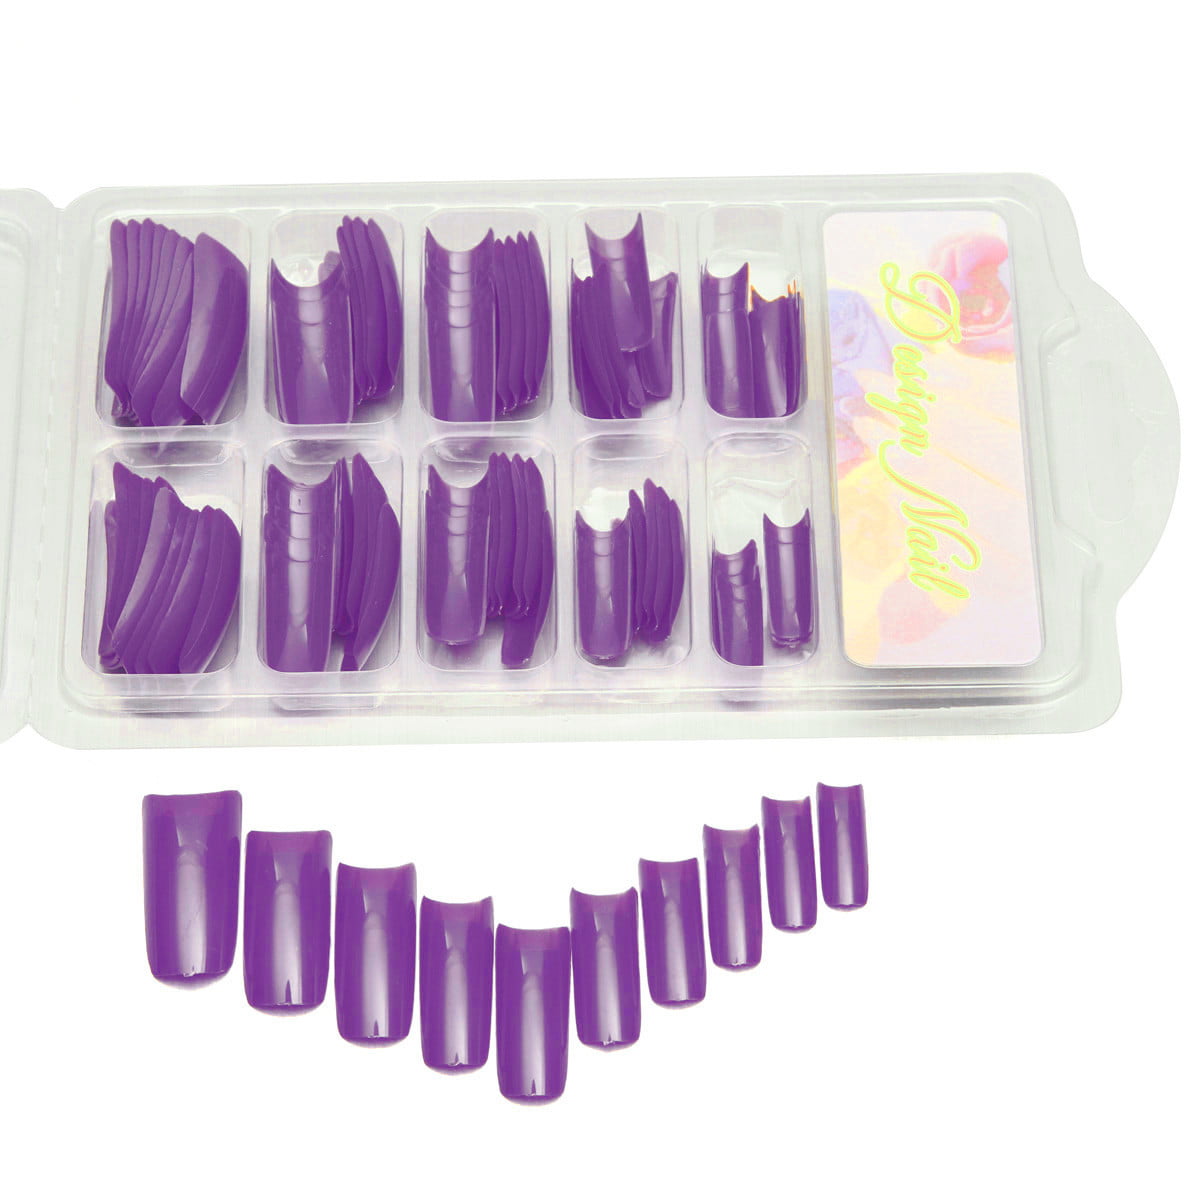 100 Pieces Full Cover French Artificial False Nail Tips For DIY In Box ...